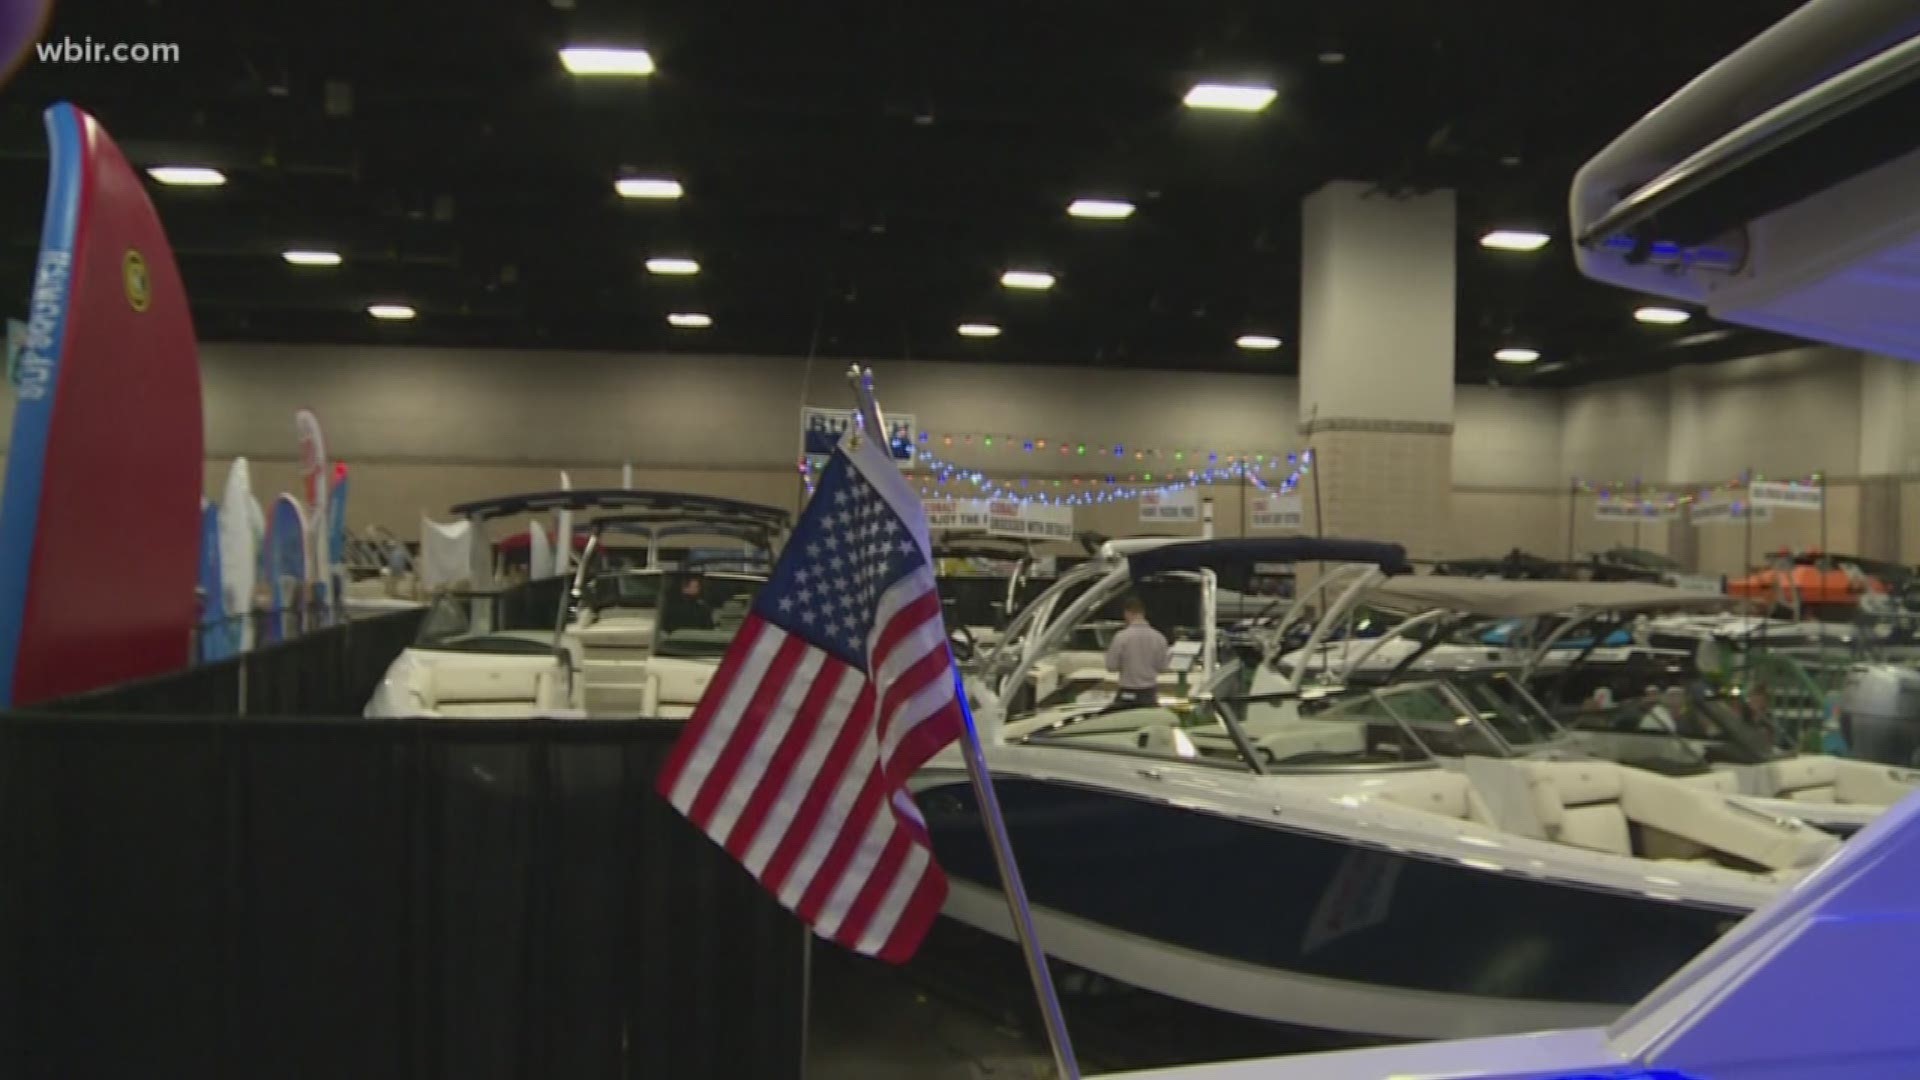 The Downtown Knoxville Boat Show continues through Sunday